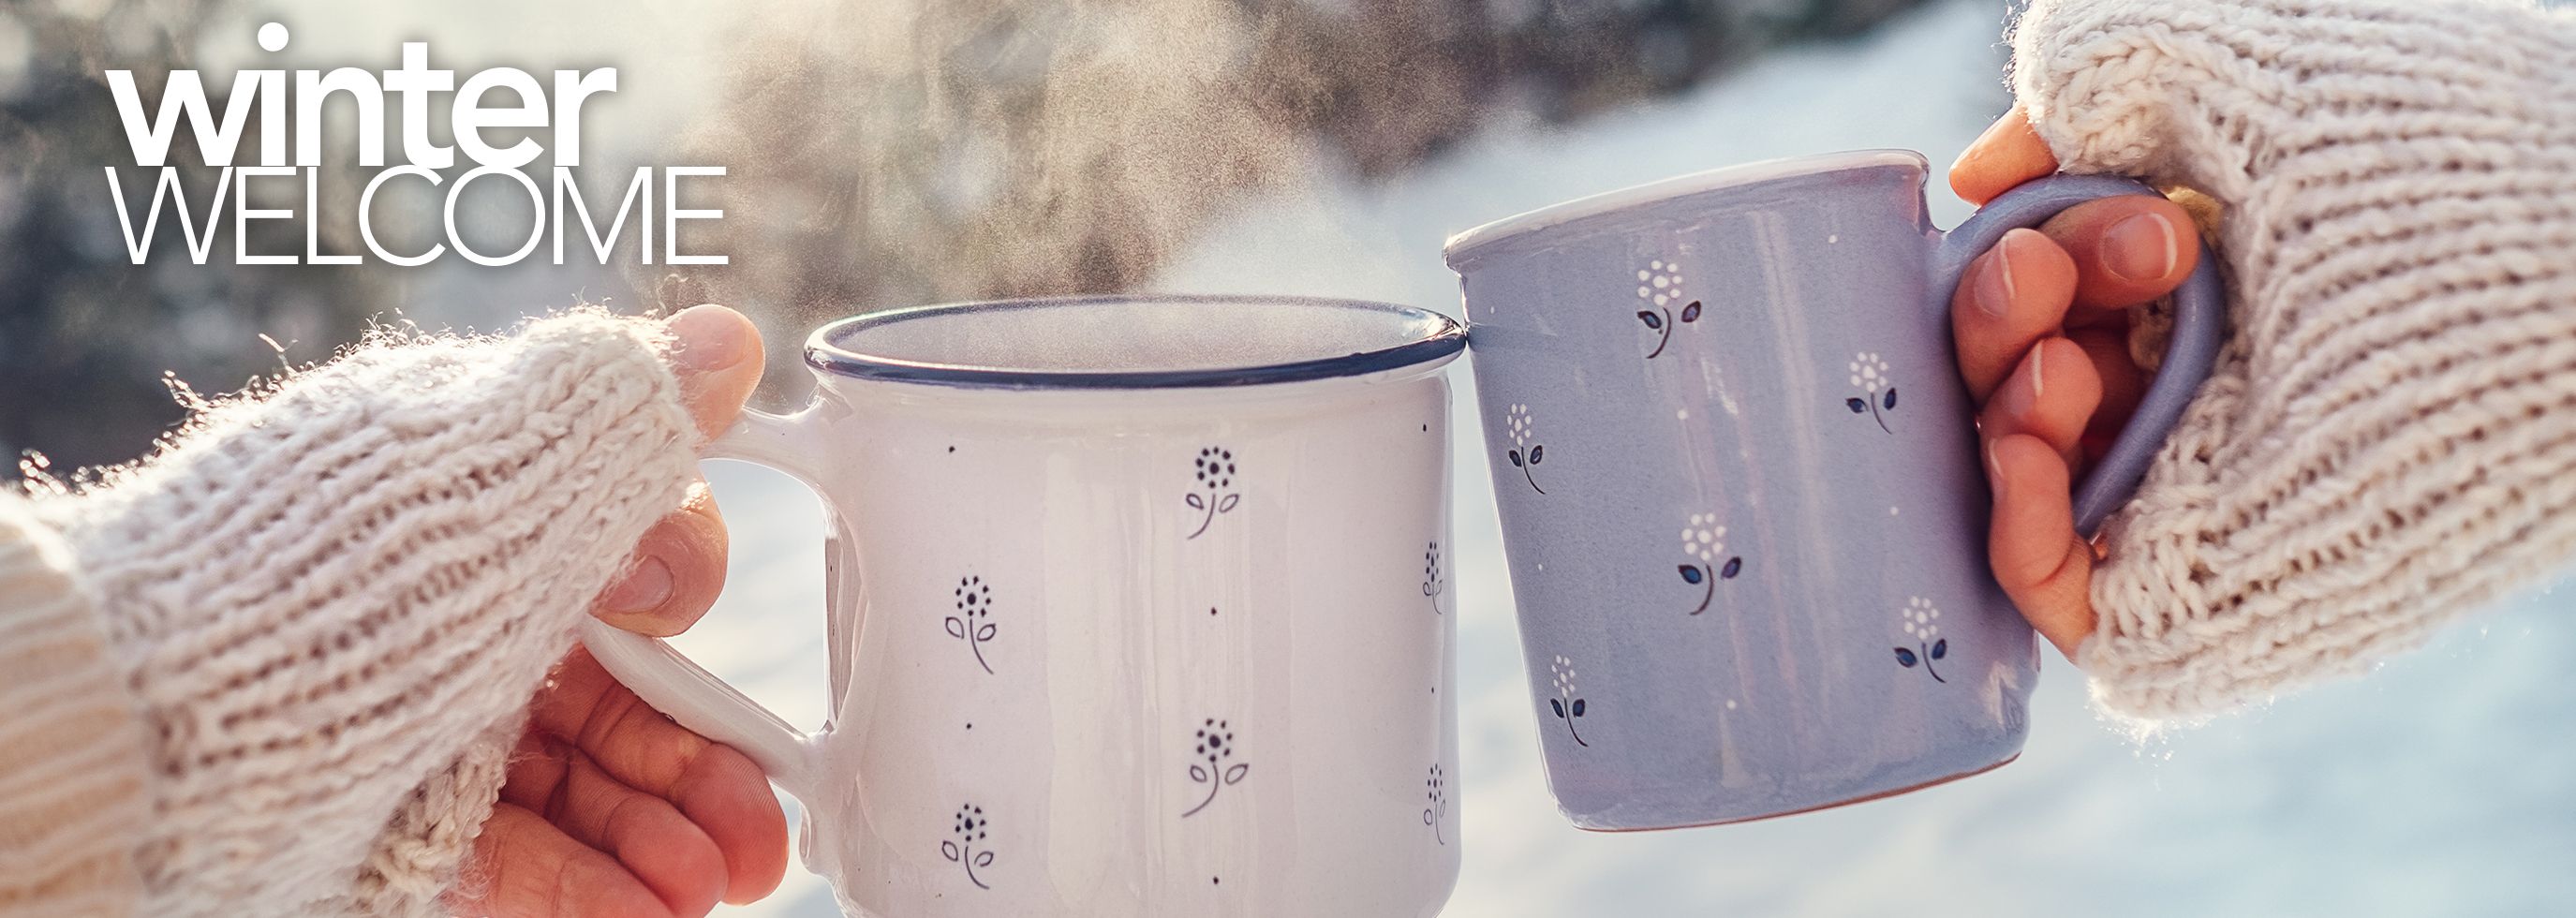 Winter scene with two hands each holding a mug with hot liquid